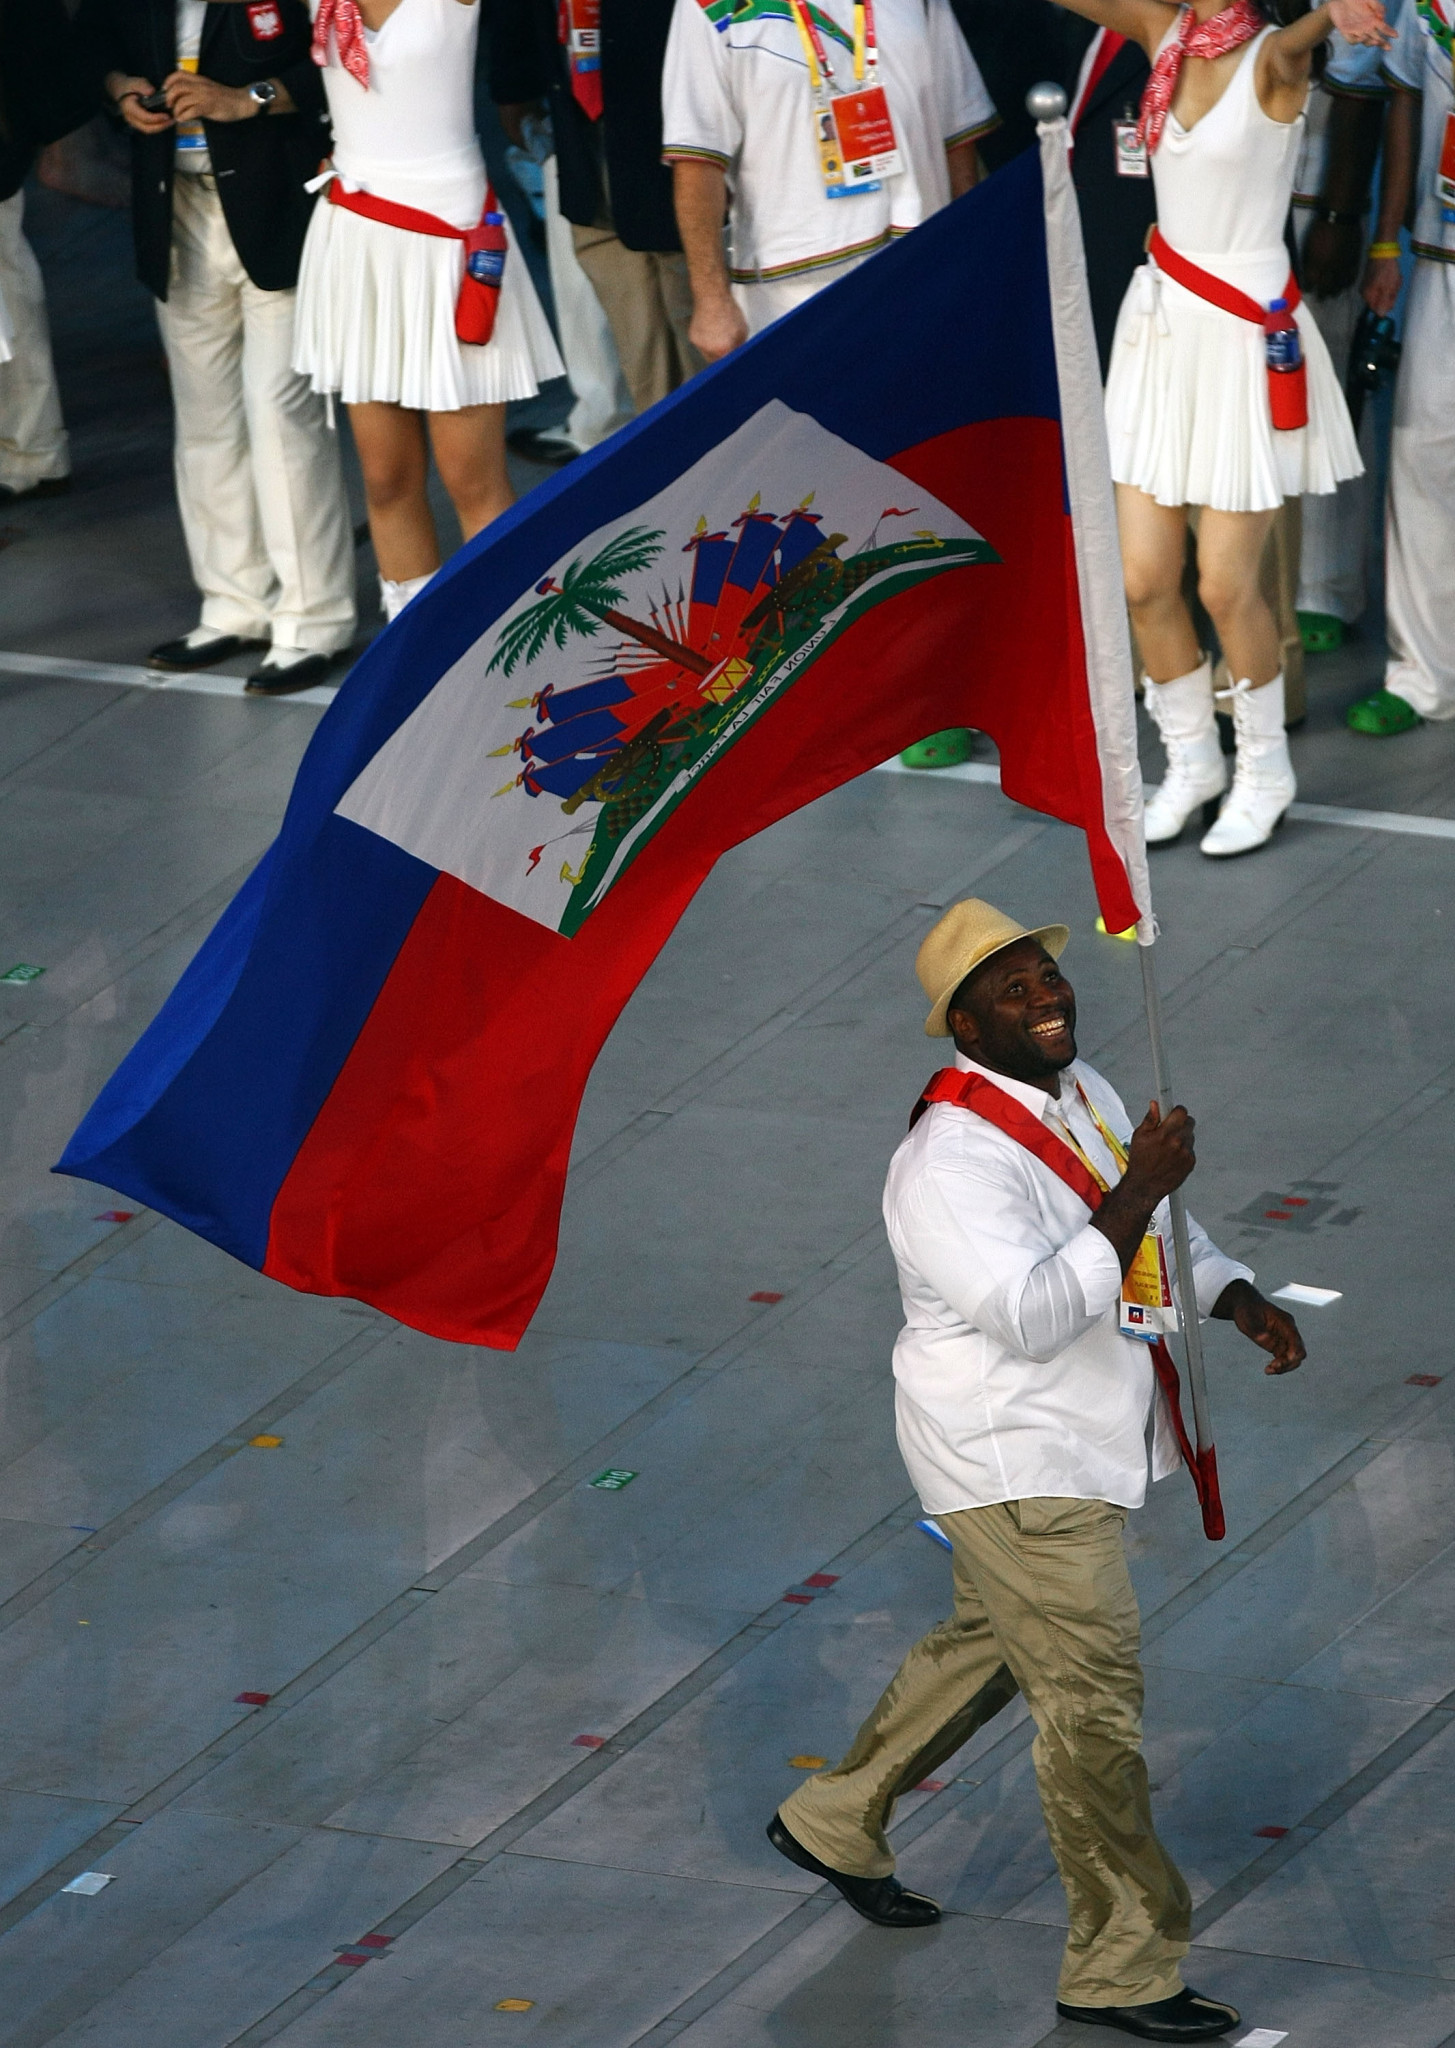 Taking the General Assembly to Haiti is seen as a significant step ©Getty Images